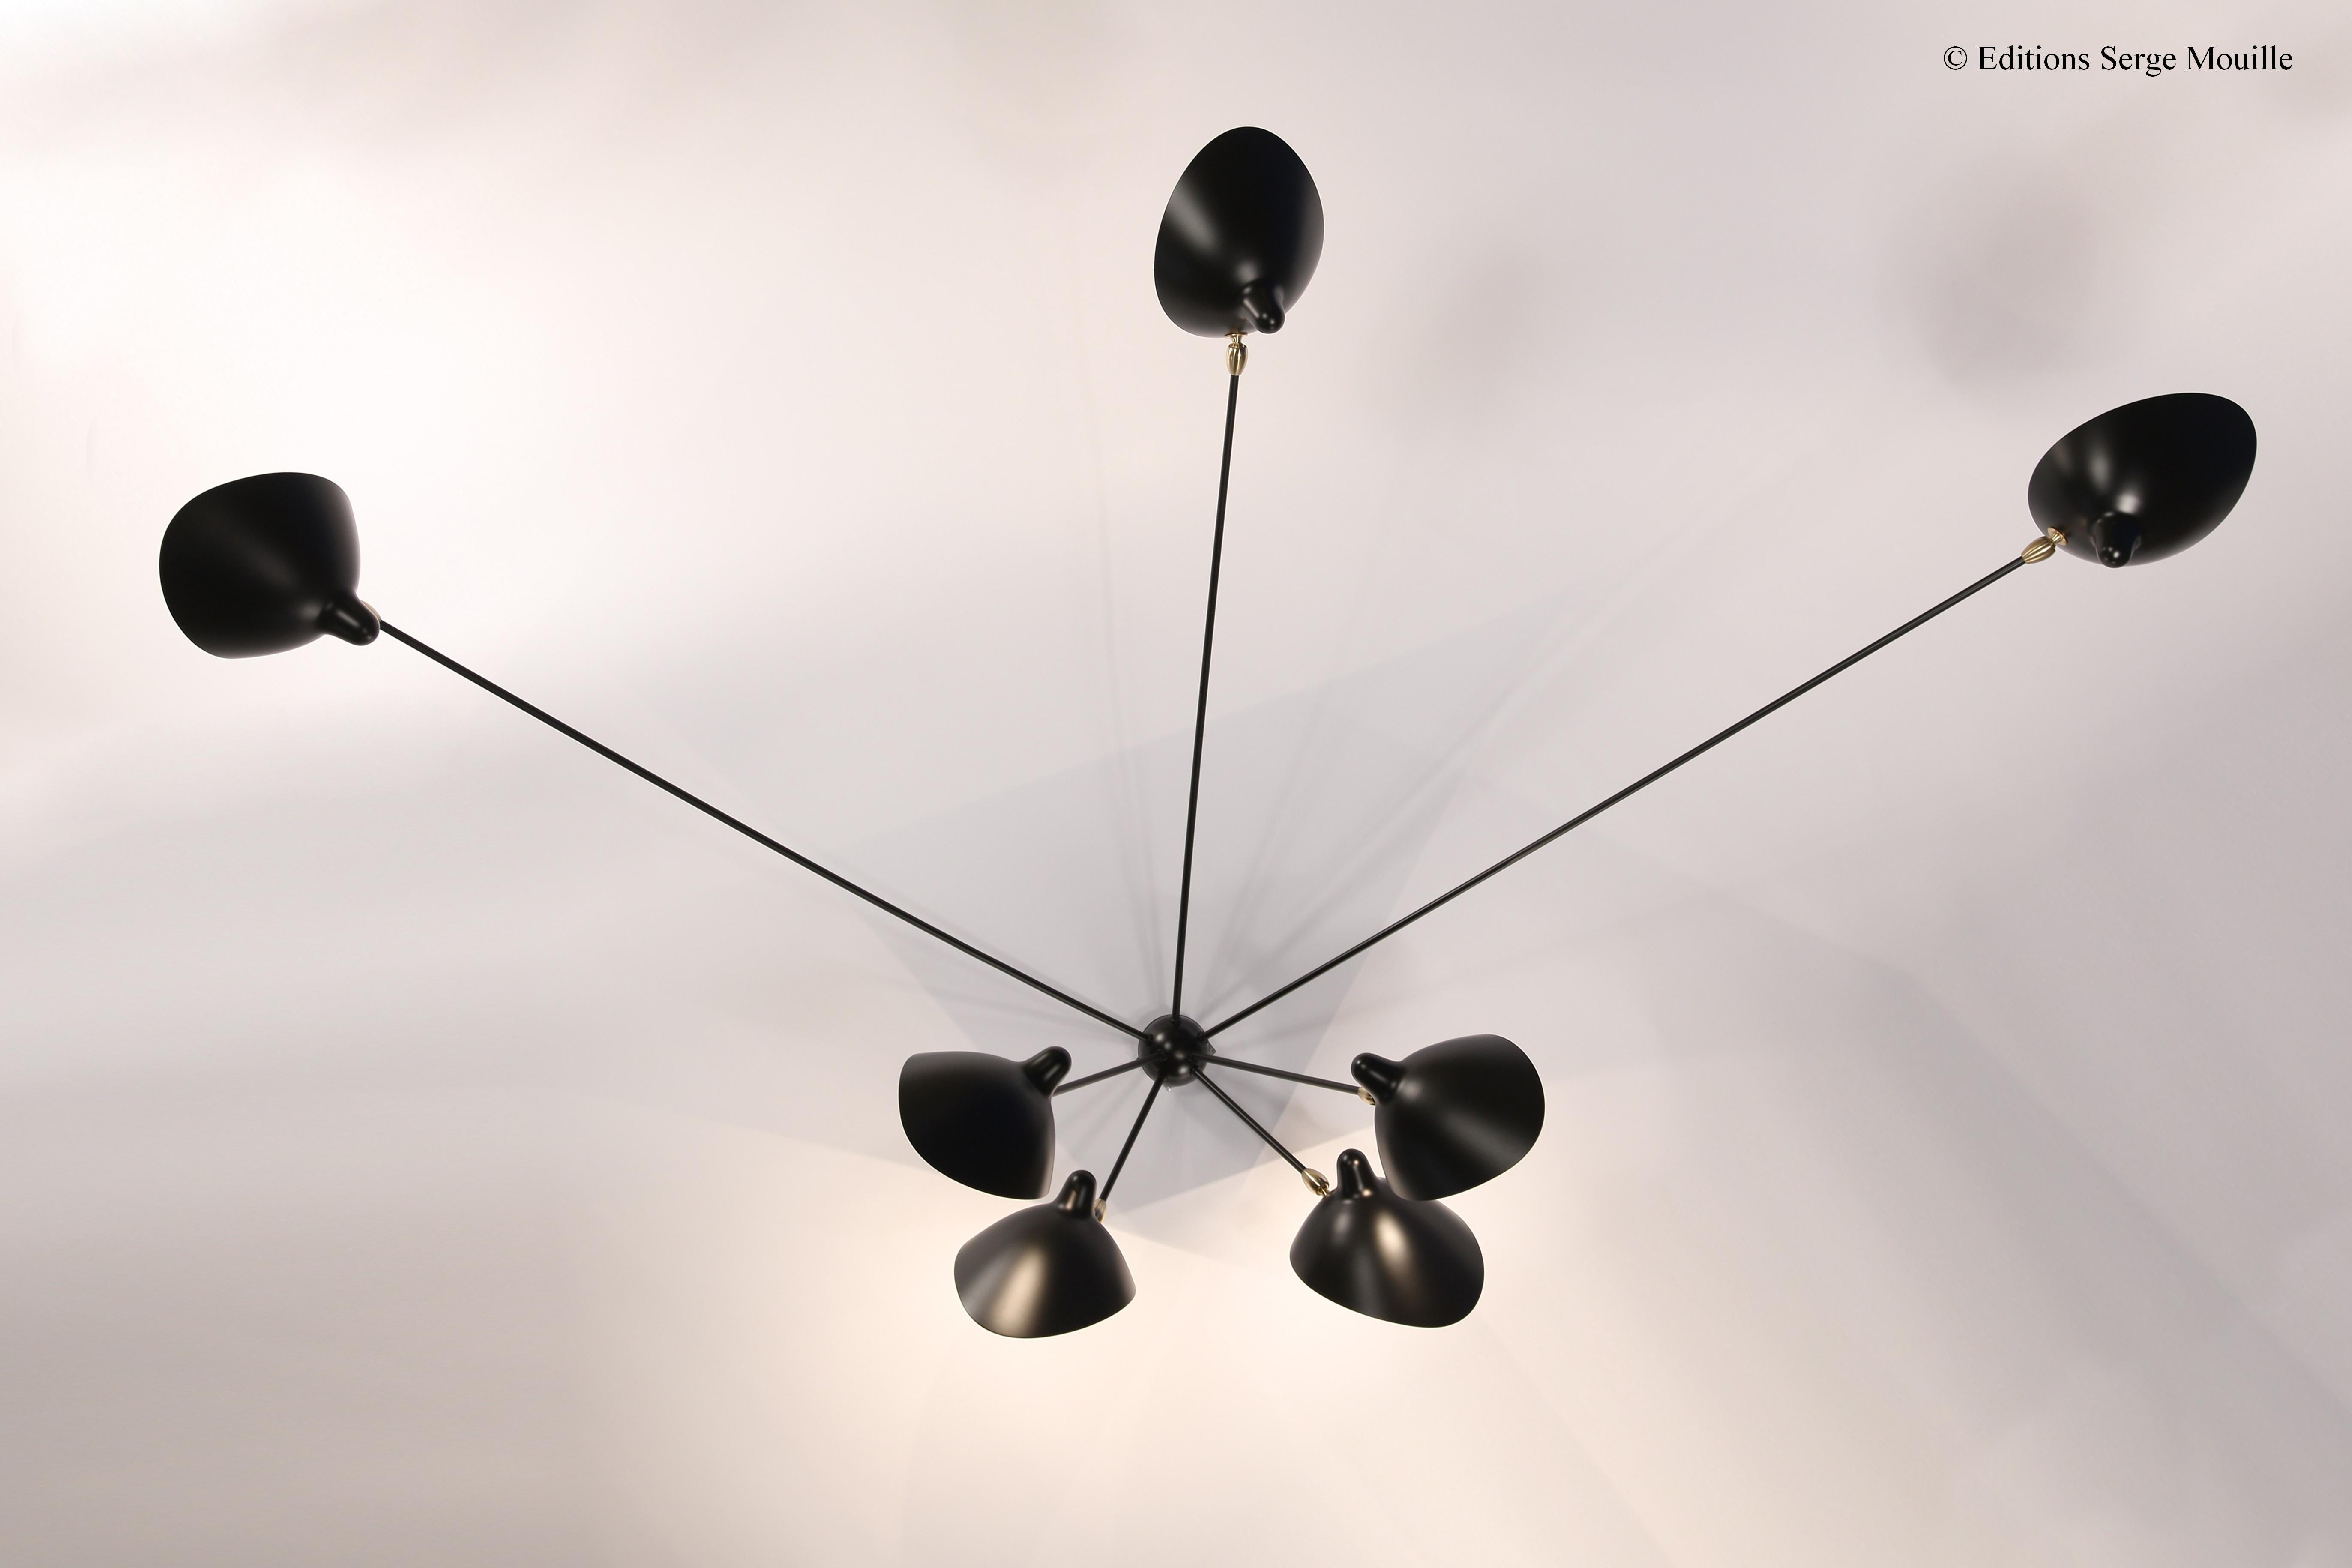 Sconce spider 7 still arms by Serge Mouille
Dimensions: D220 x W90 x H130 cm
Materials: Brass, Steel, Aluminum
One of a King. Numbered.
Also available in different color. 

All our lamps can be wired according to each country. If sold to the